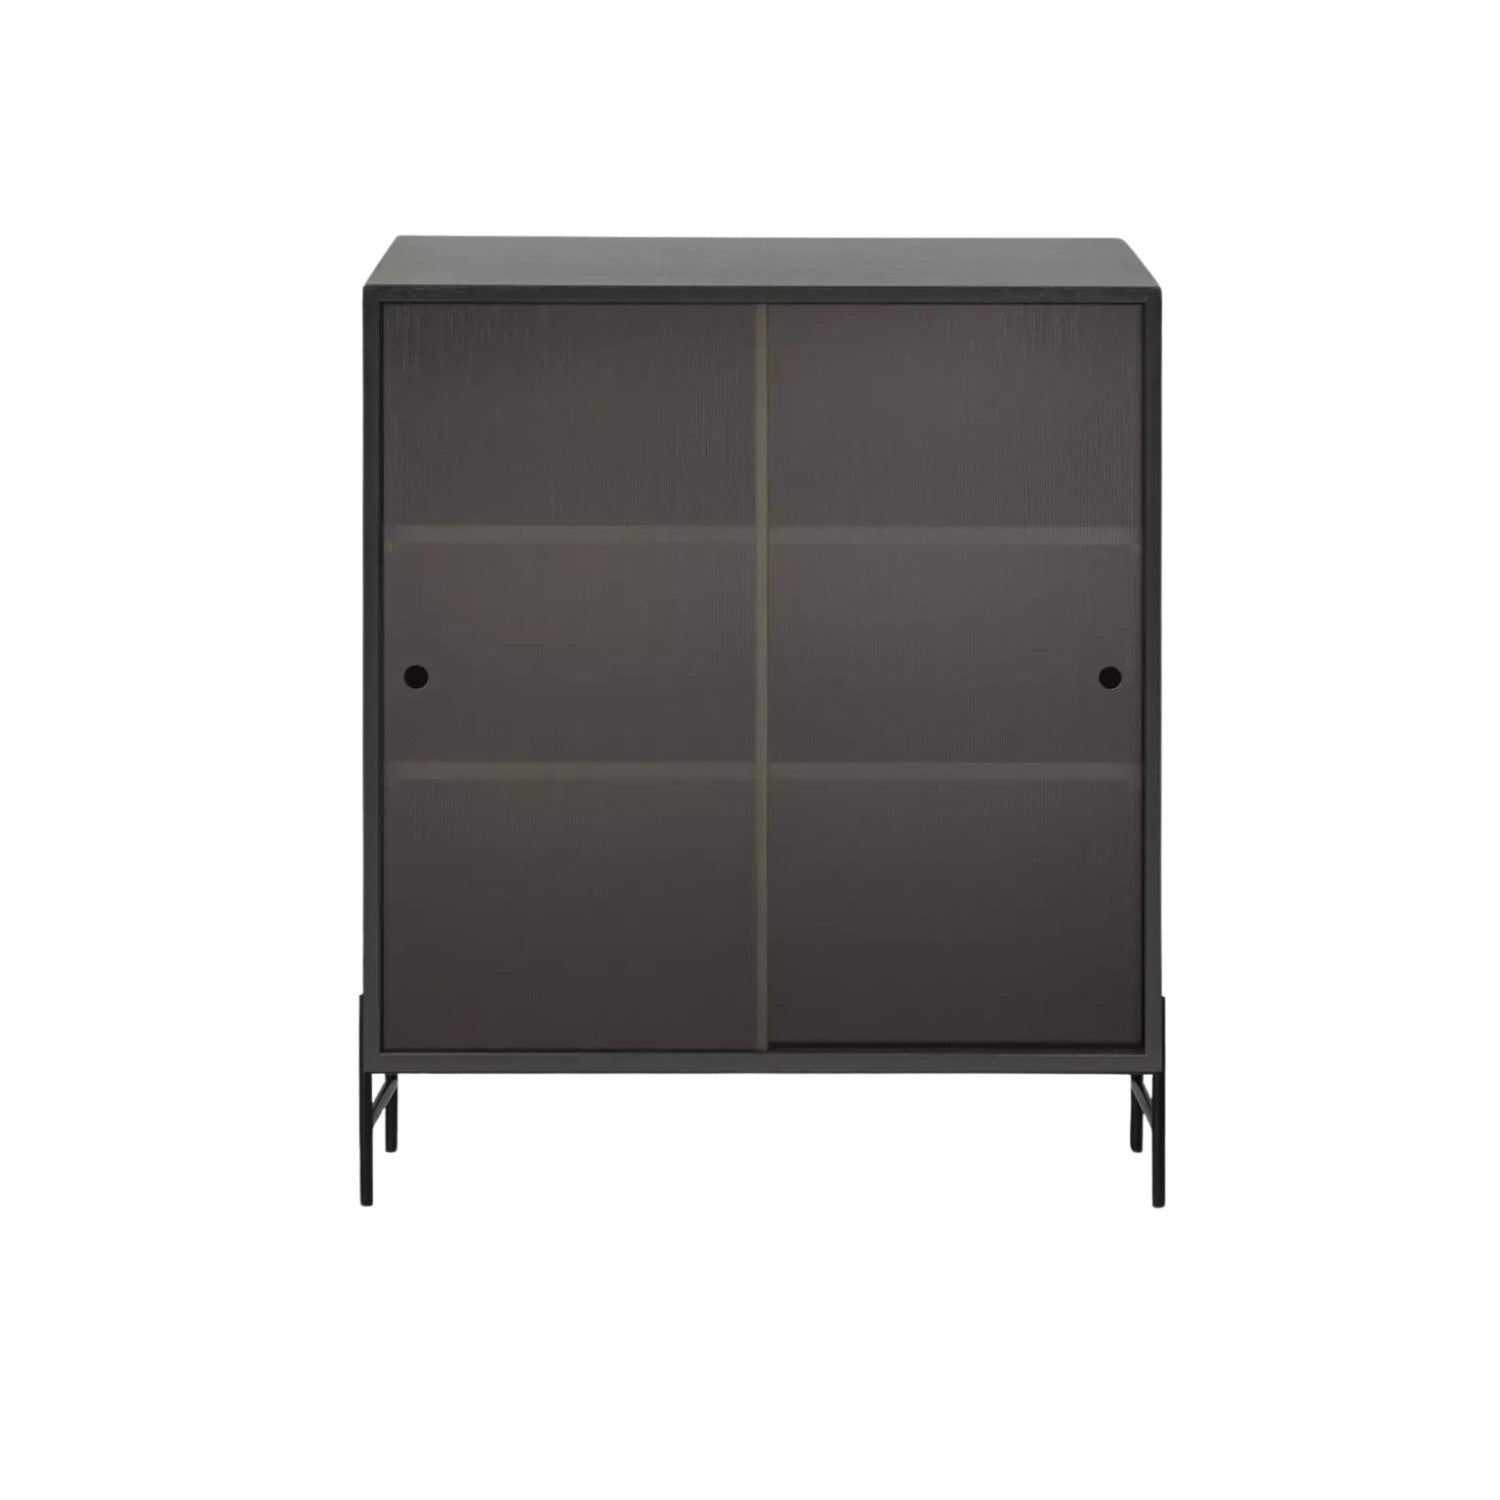 HIFIVE GLASS LOW H75 - Cabinet